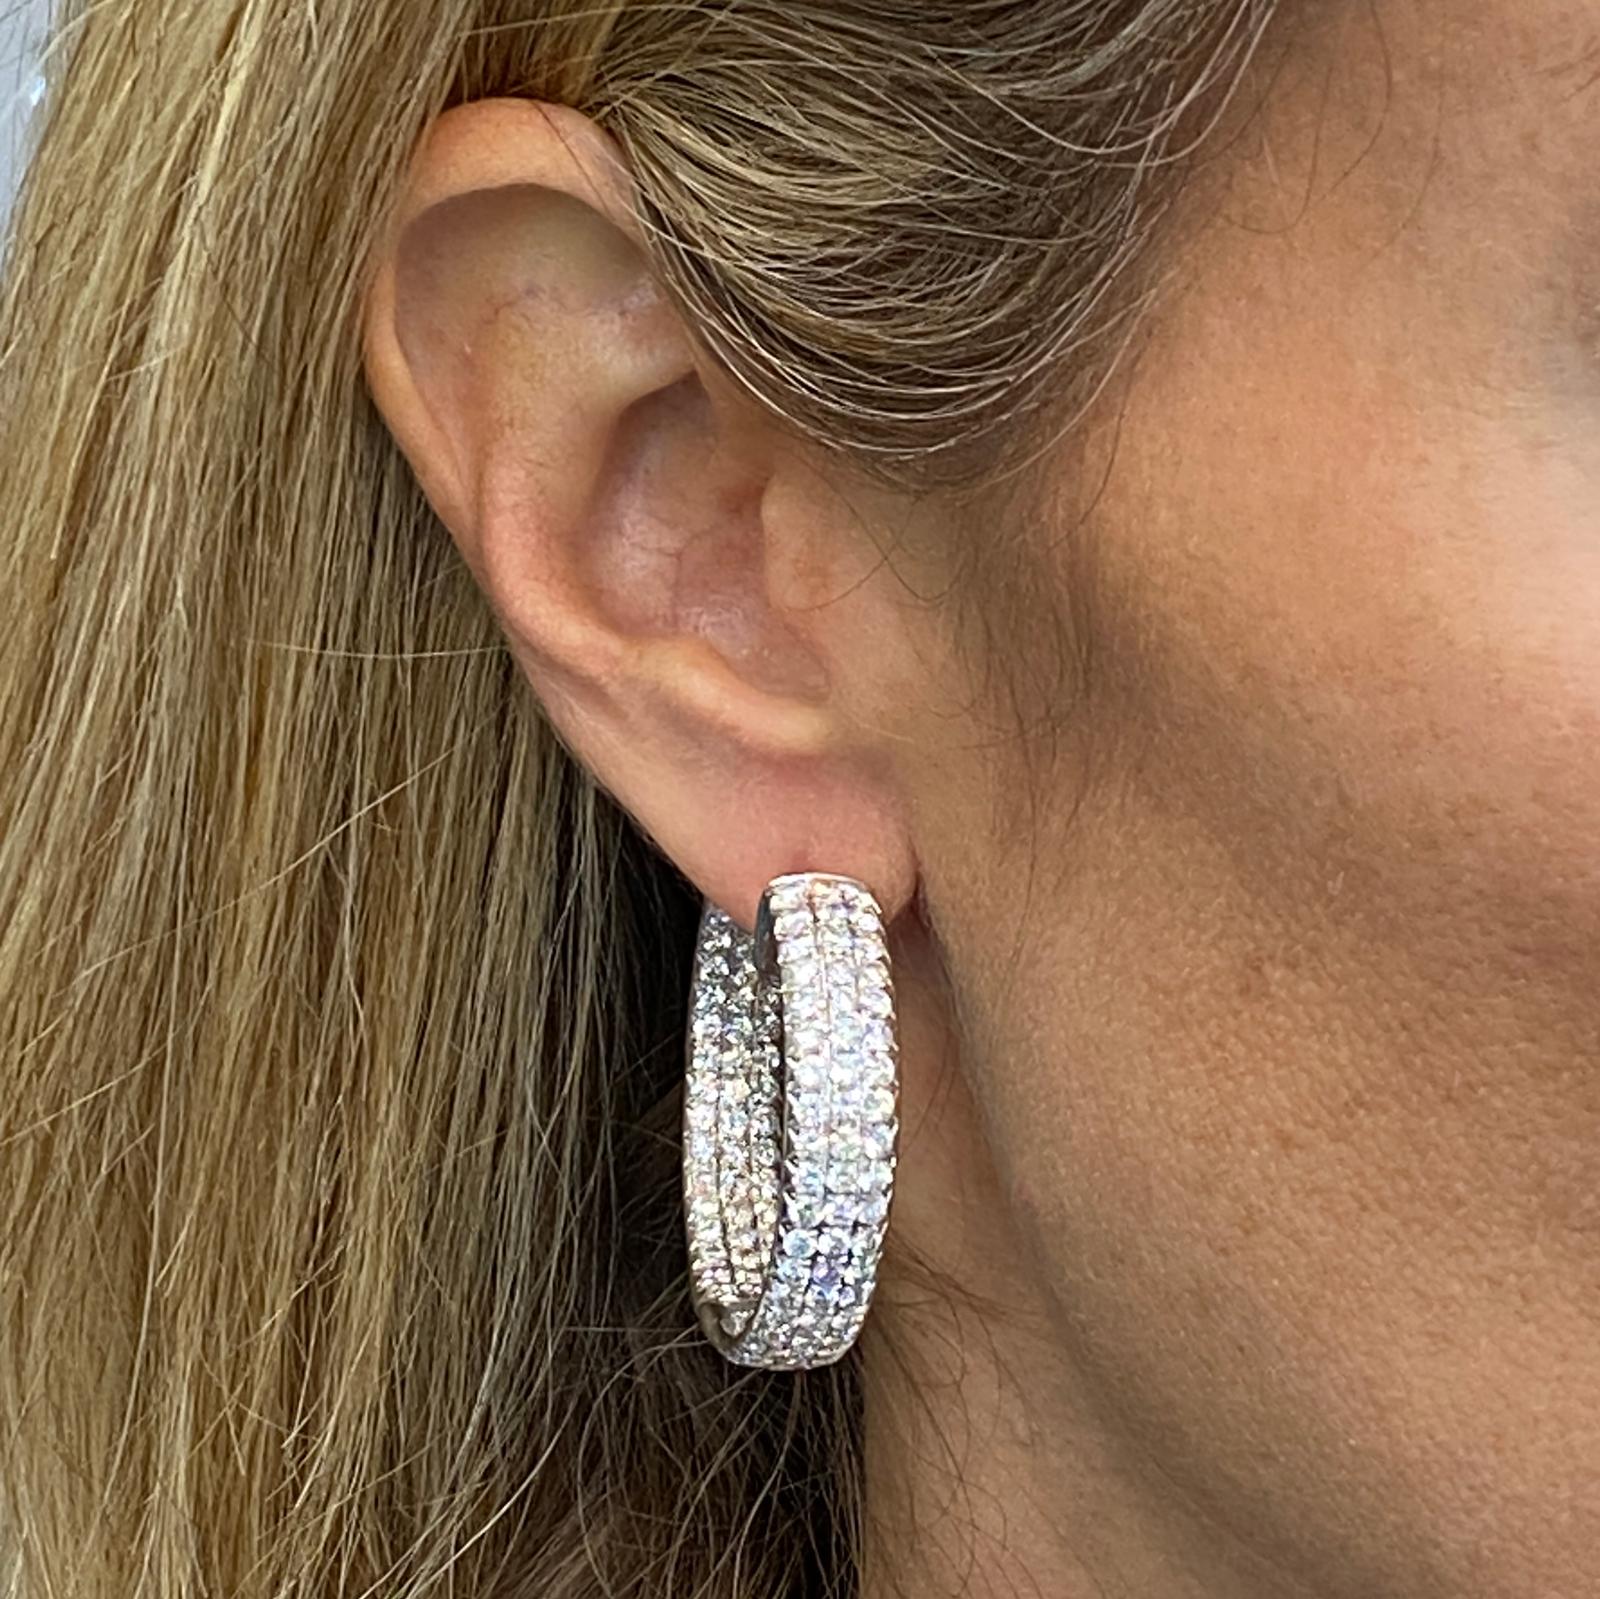 Stunning wide in & out diamond hoop earrings crafted in 18 karat white gold. The three rows feature 252 round brilliant cut diamonds weighing 10.65 carat total weight and graded F-G color and VS clarity. The hoops measure .30 inches in width, and